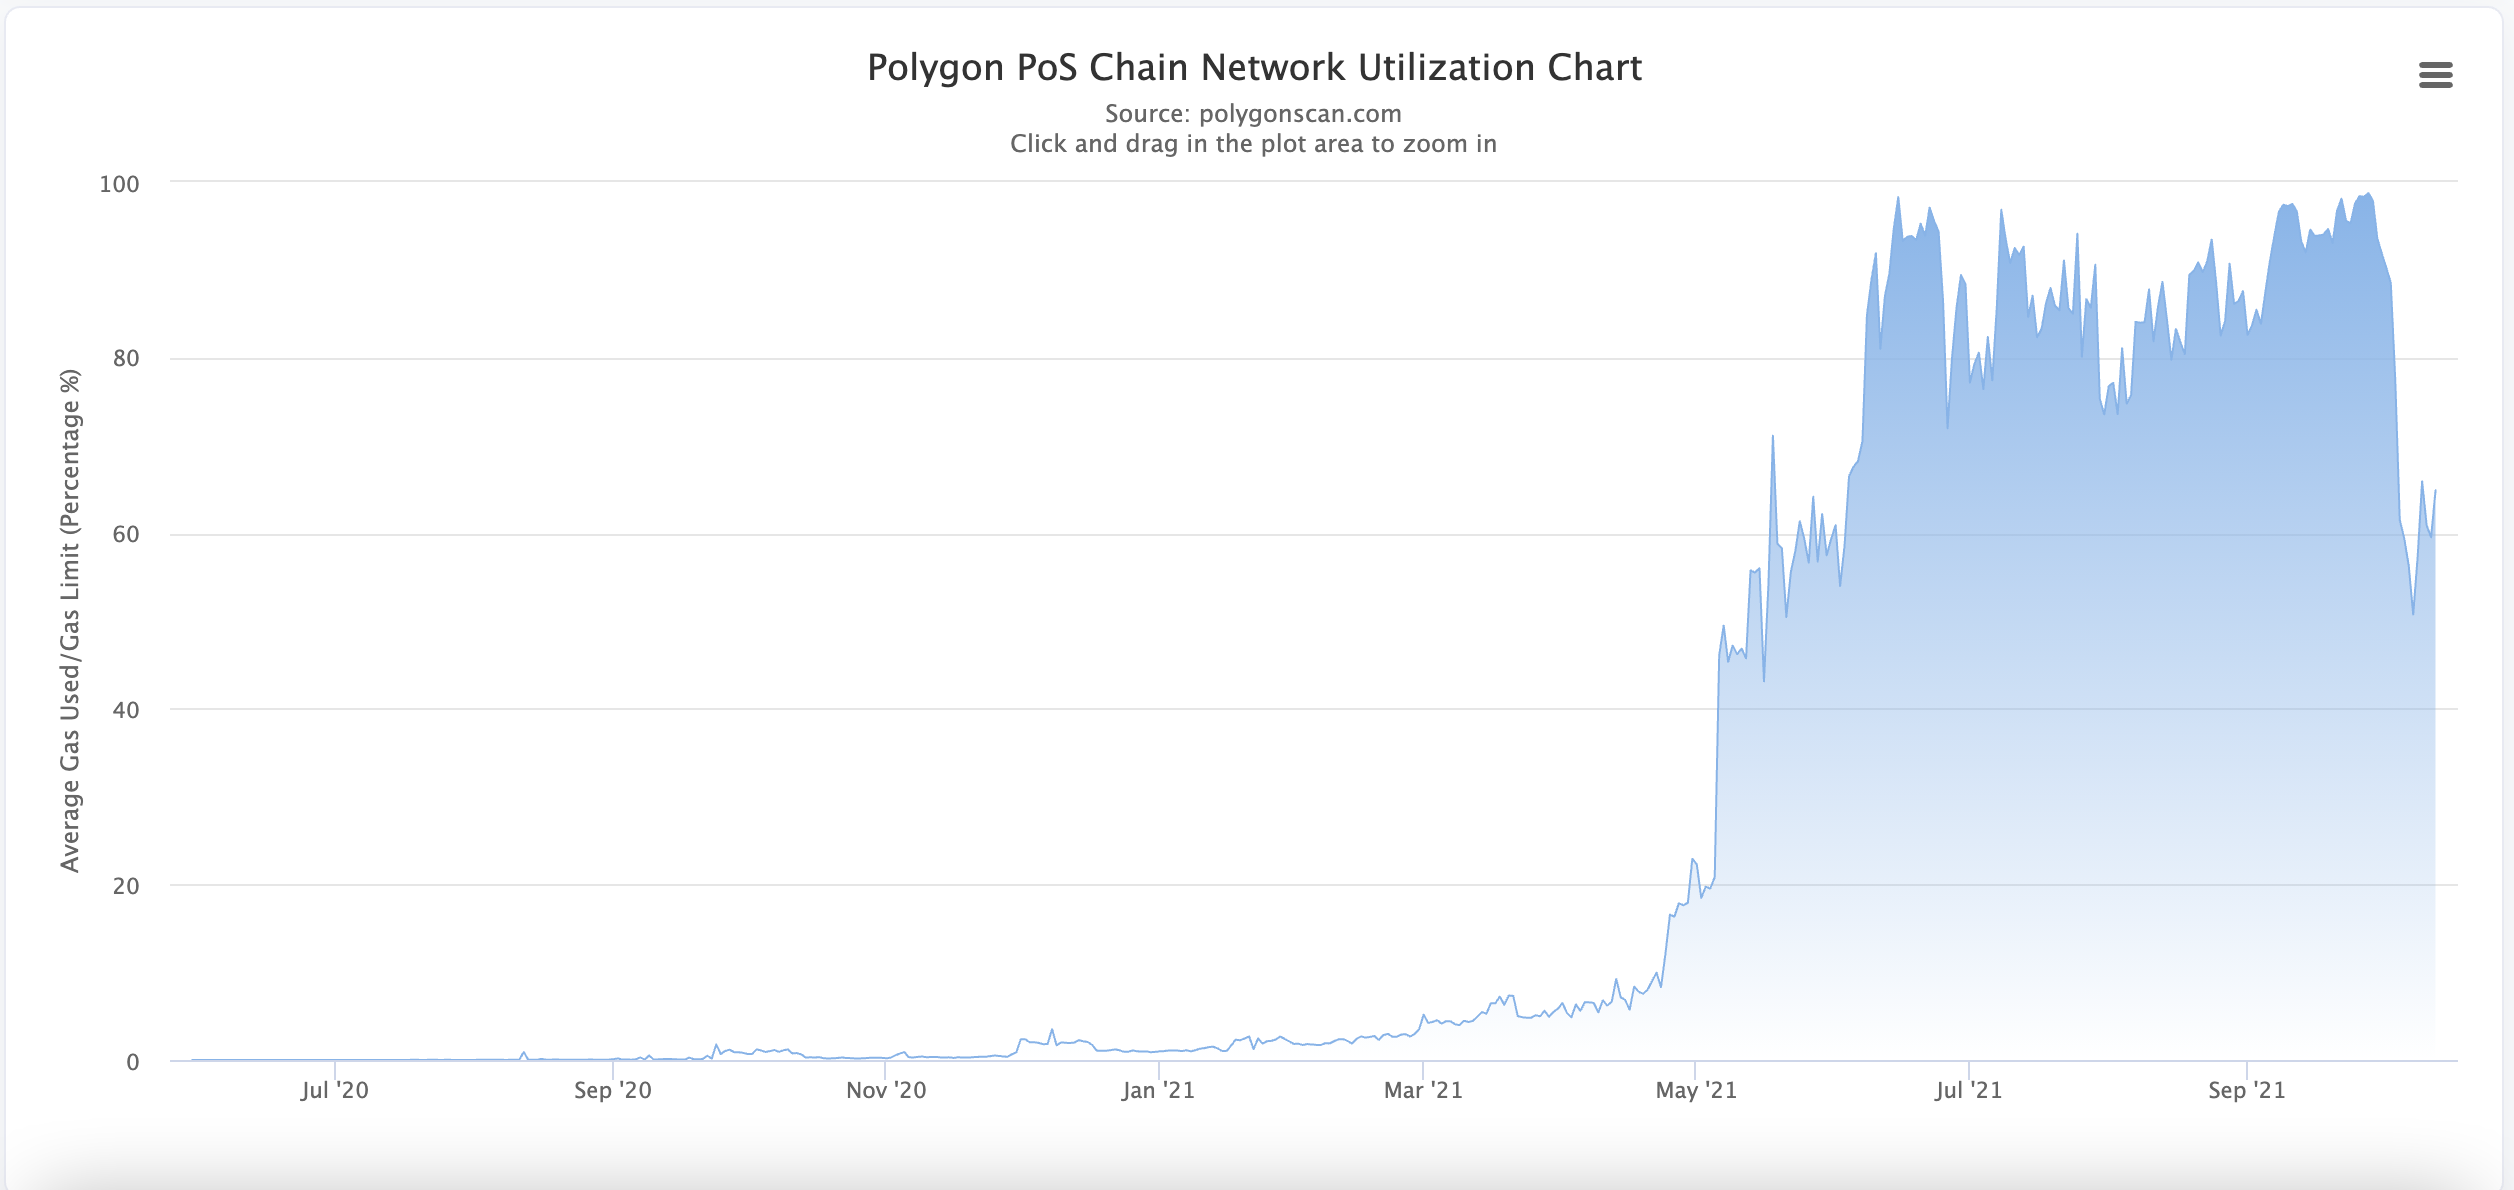 Network Utilization Rate - From polygonscan.com